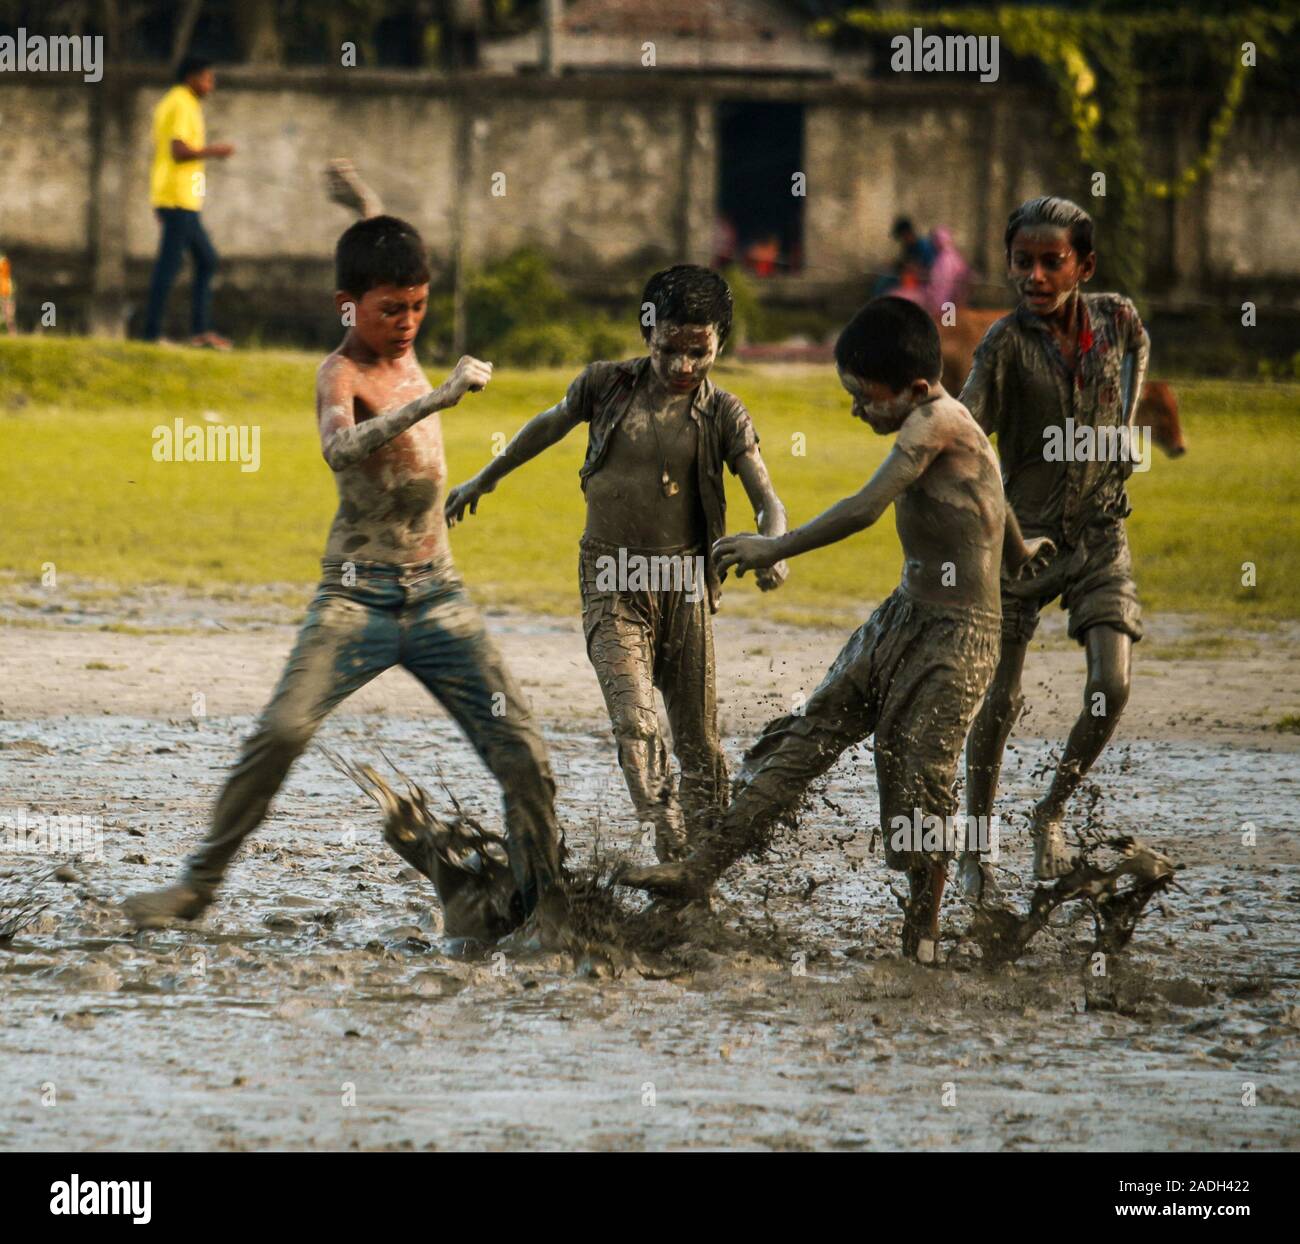 Kids Playing In The Mud